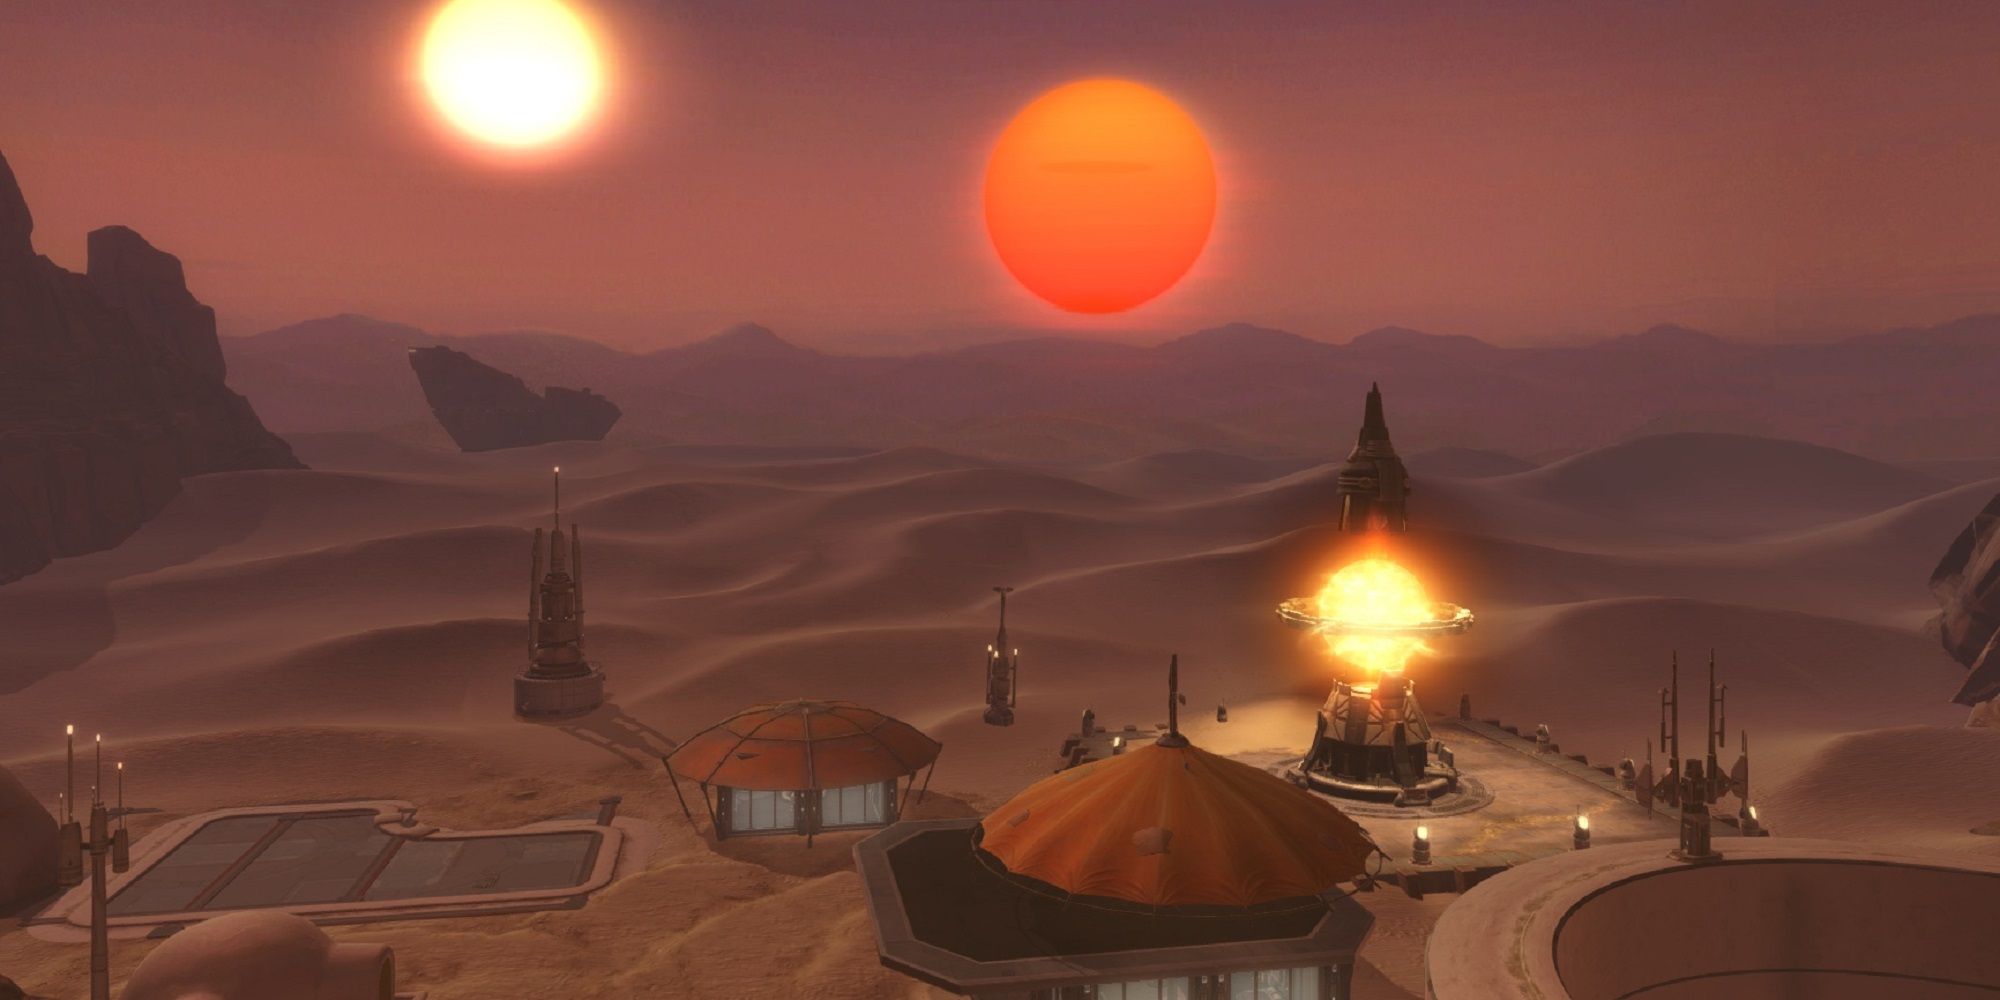 SWTOR's Tatooine Homestead, with sand dunes and two suns in the background